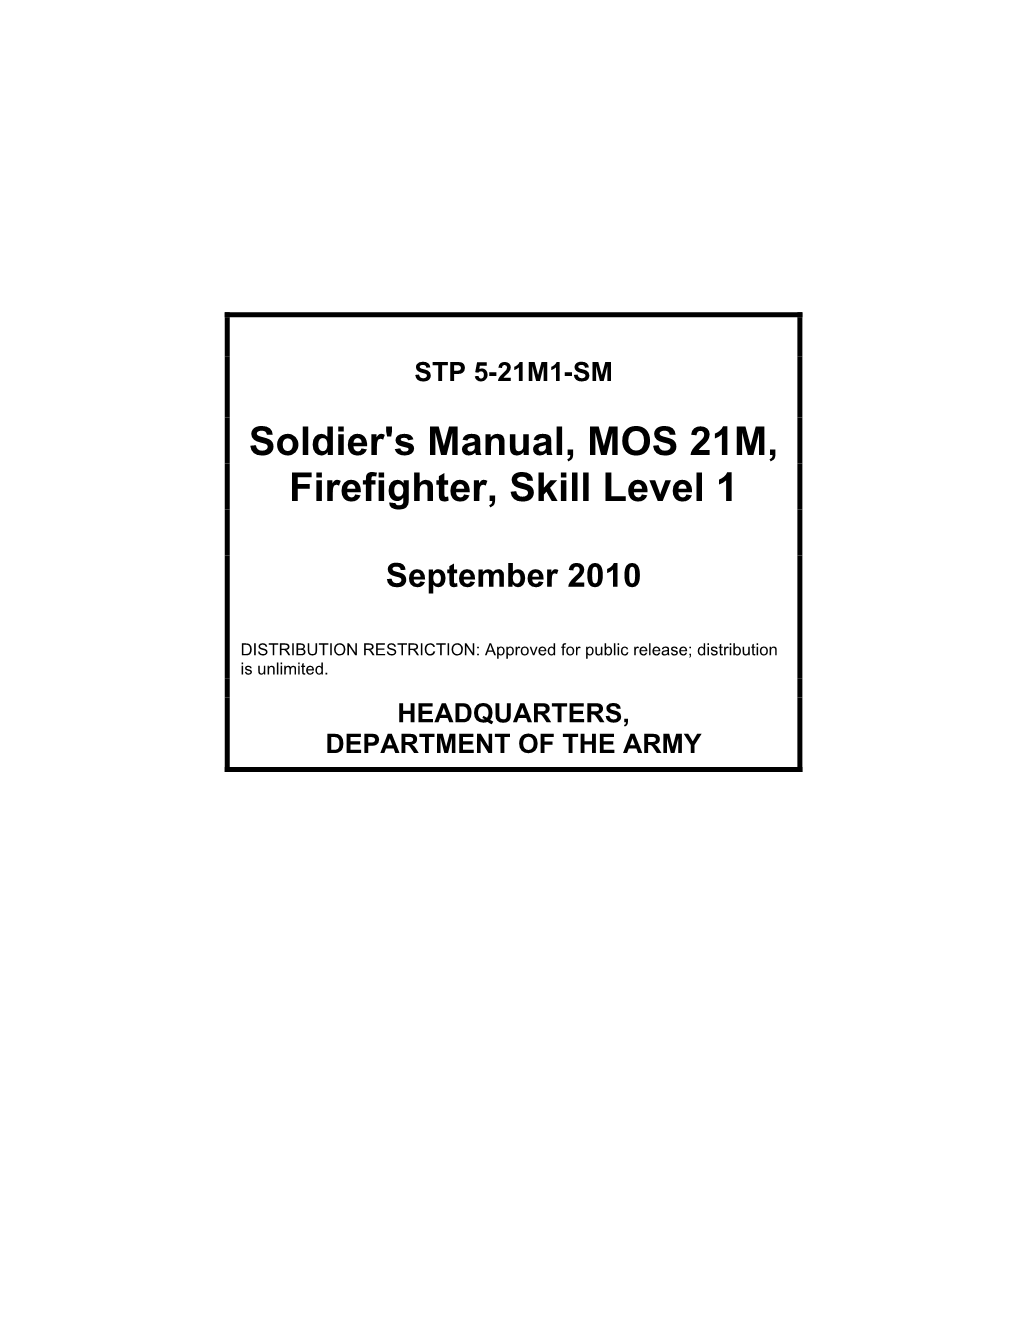 Soldier's Manual, MOS 21M, Firefighter, Skill Level 1